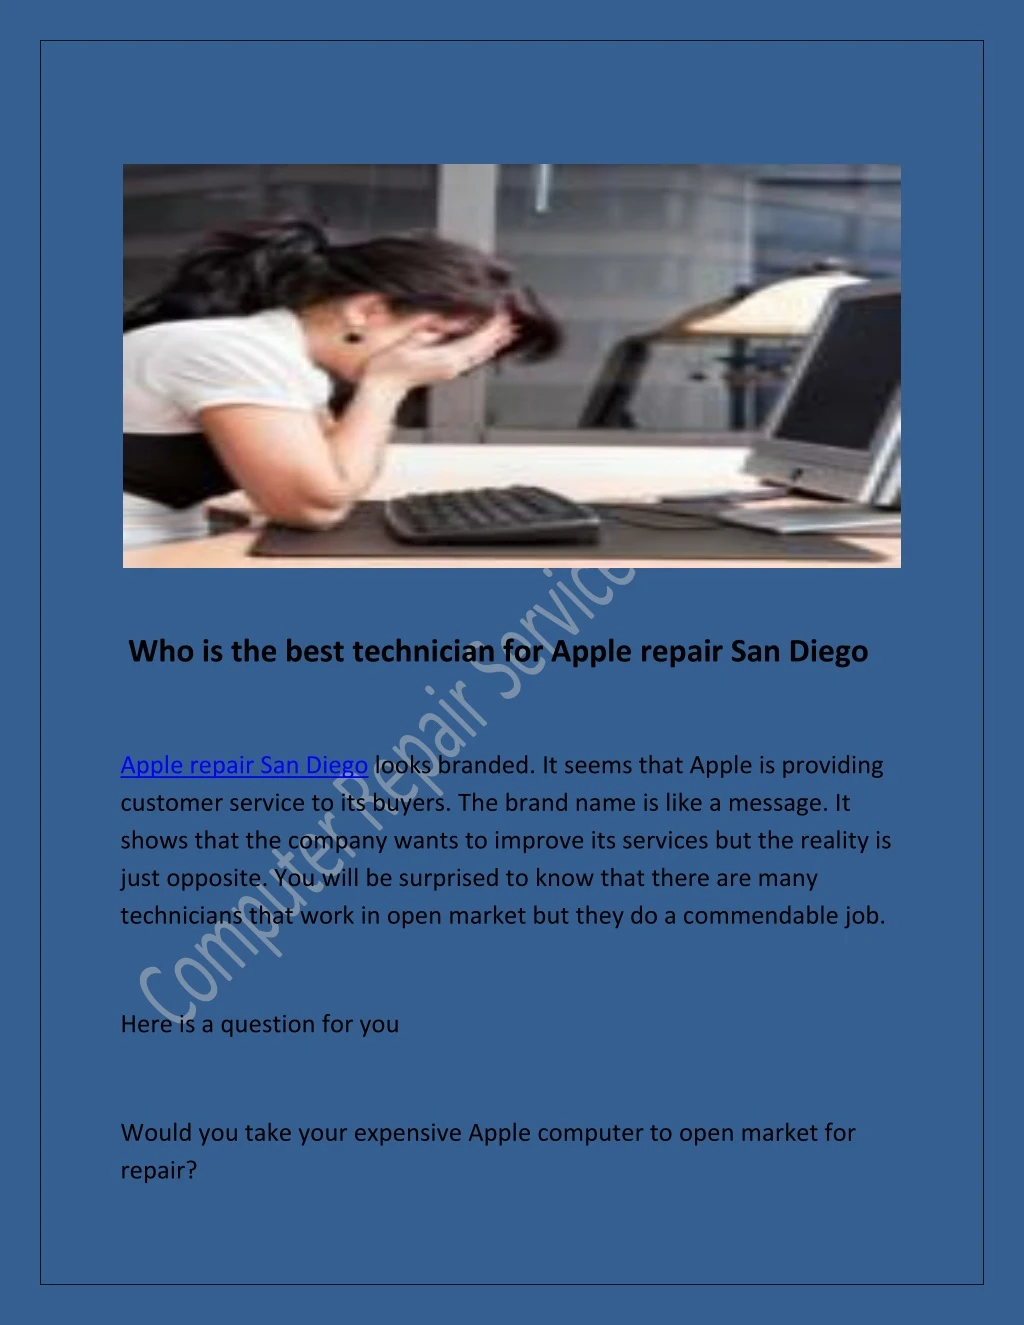 who is the best technician for apple repair